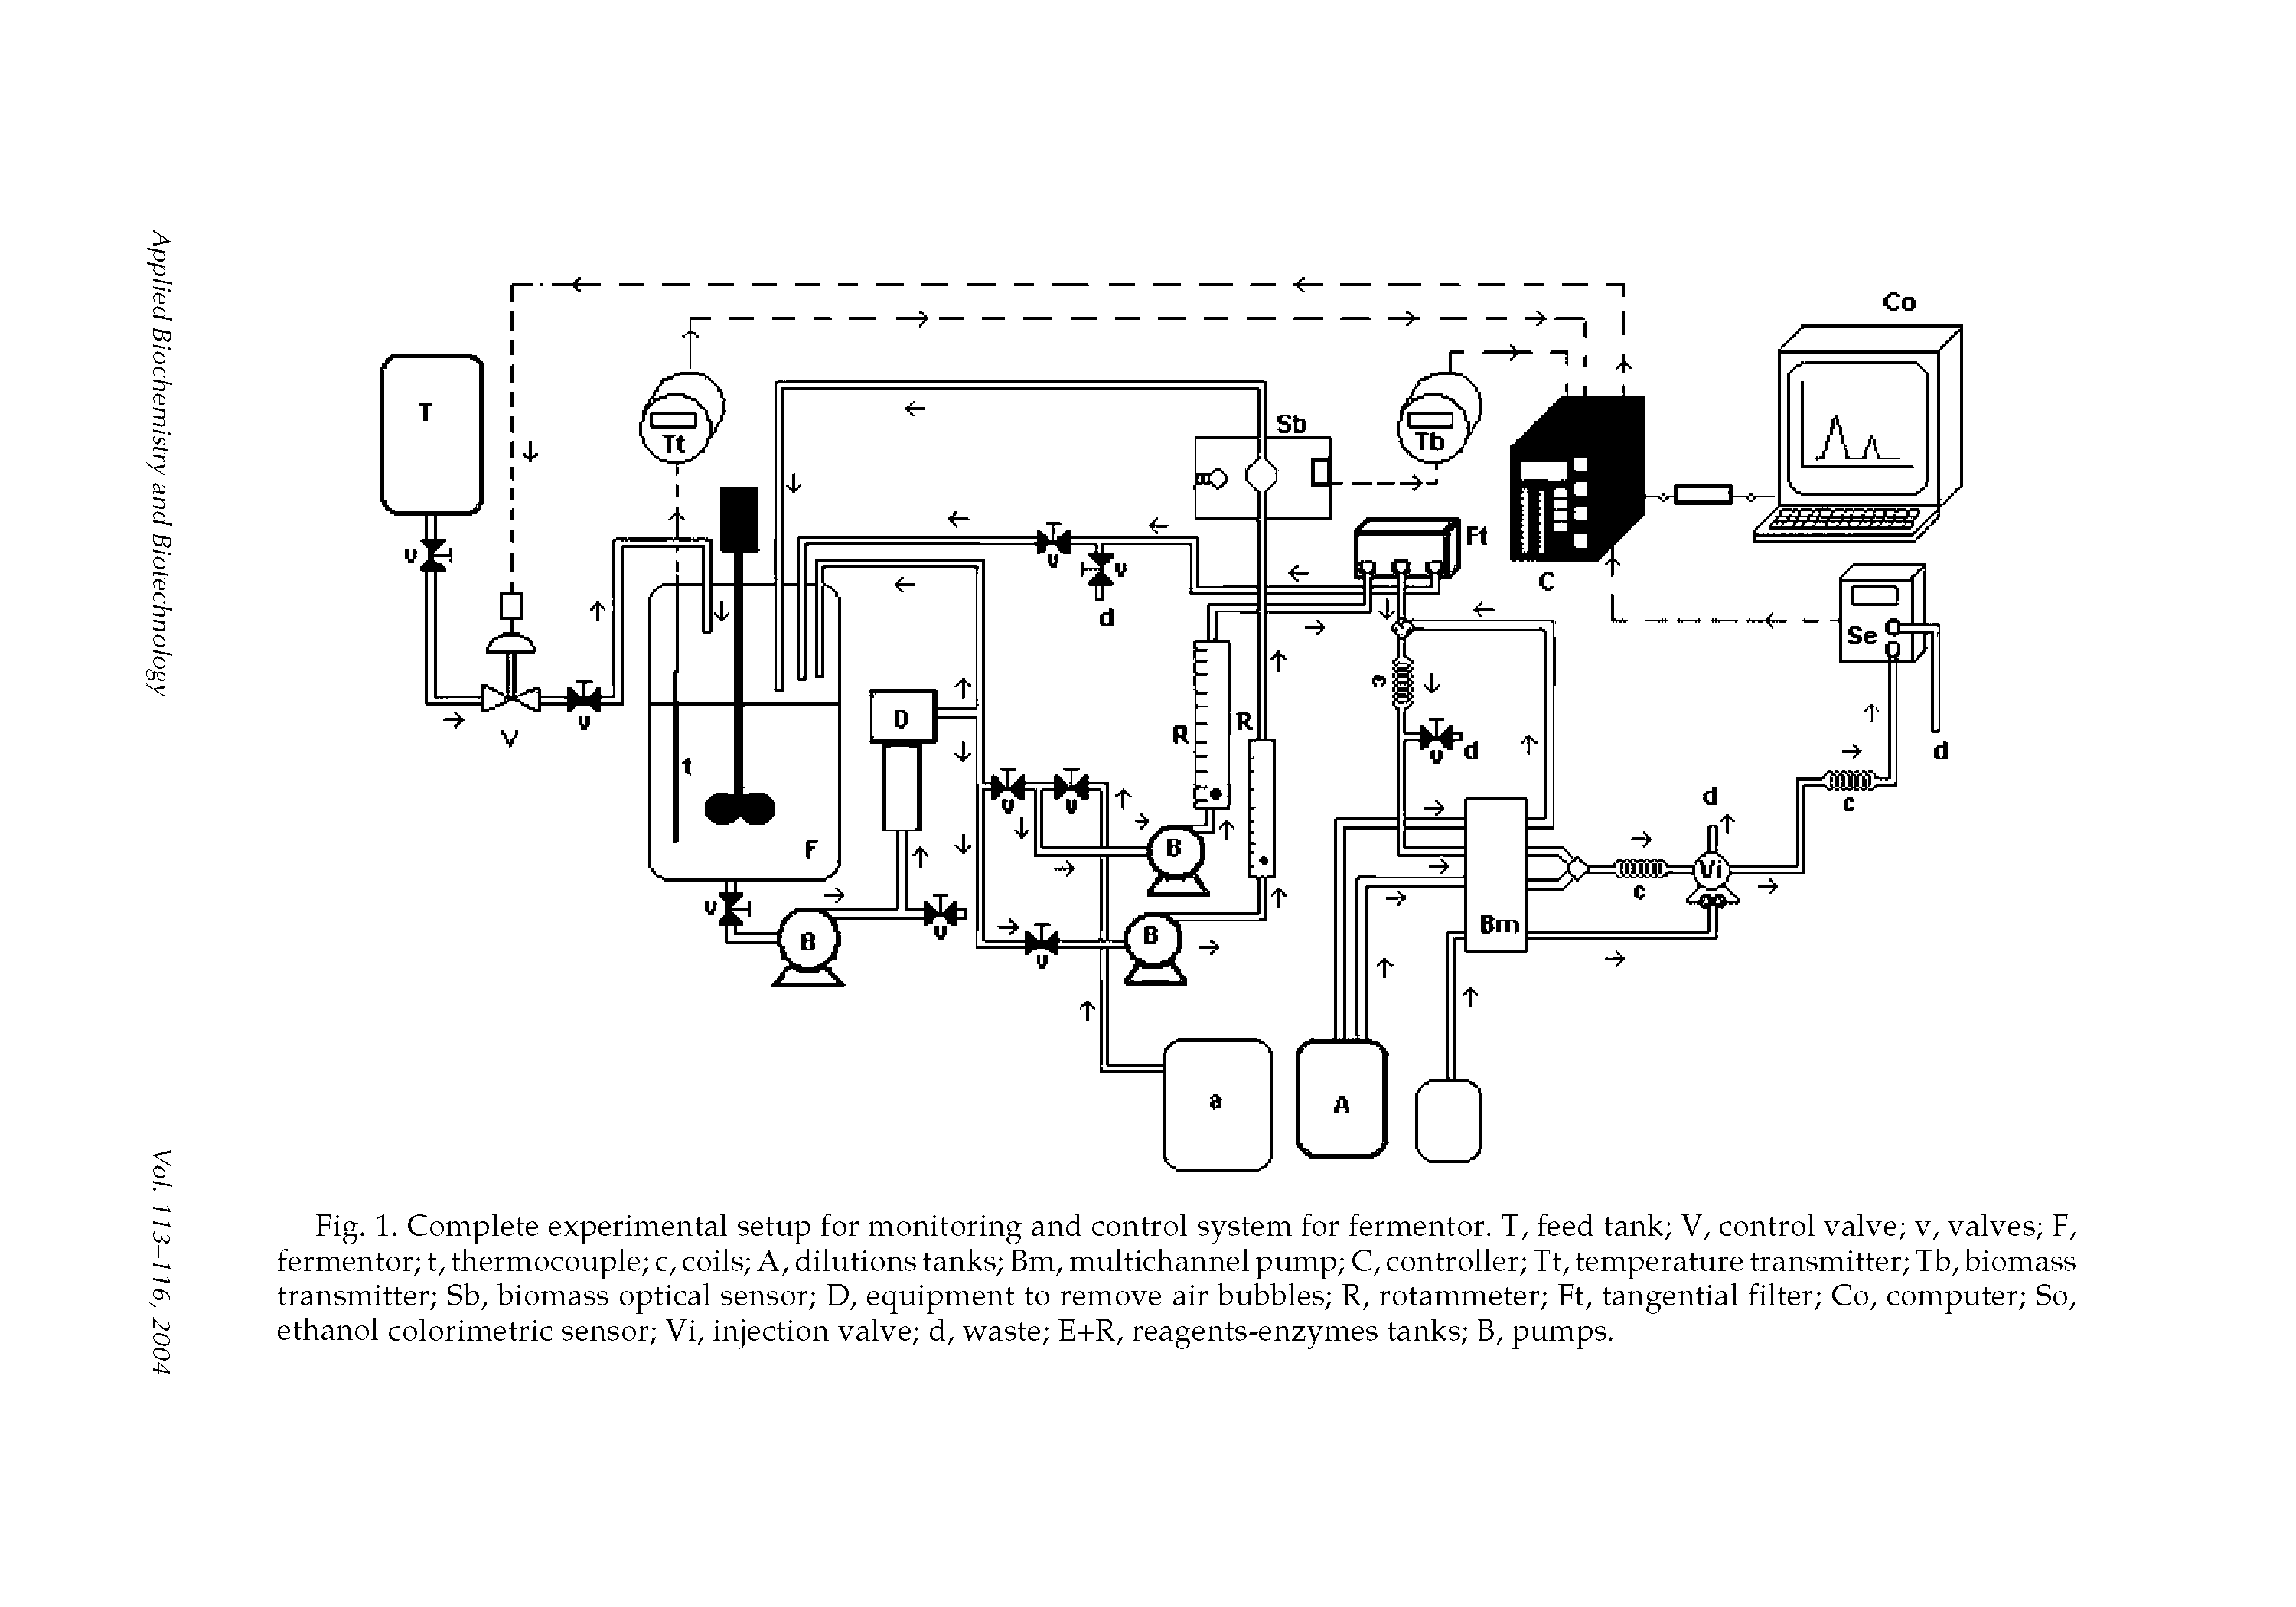 Fig. 1. Complete experimental setup for monitoring and control system for fermentor. T, feed tank V, control valve v, valves F, fermentor t, thermocouple c, coils A, dilutions tanks Bm, multichannel pump C, controller Tt, temperature transmitter Tb, biomass transmitter Sb, biomass optical sensor D, equipment to remove air bubbles R, rotammeter Ft, tangential filter Co, computer So, ethanol colorimetric sensor Vi, injection valve d, waste E+R, reagents-enzymes tanks B, pumps.